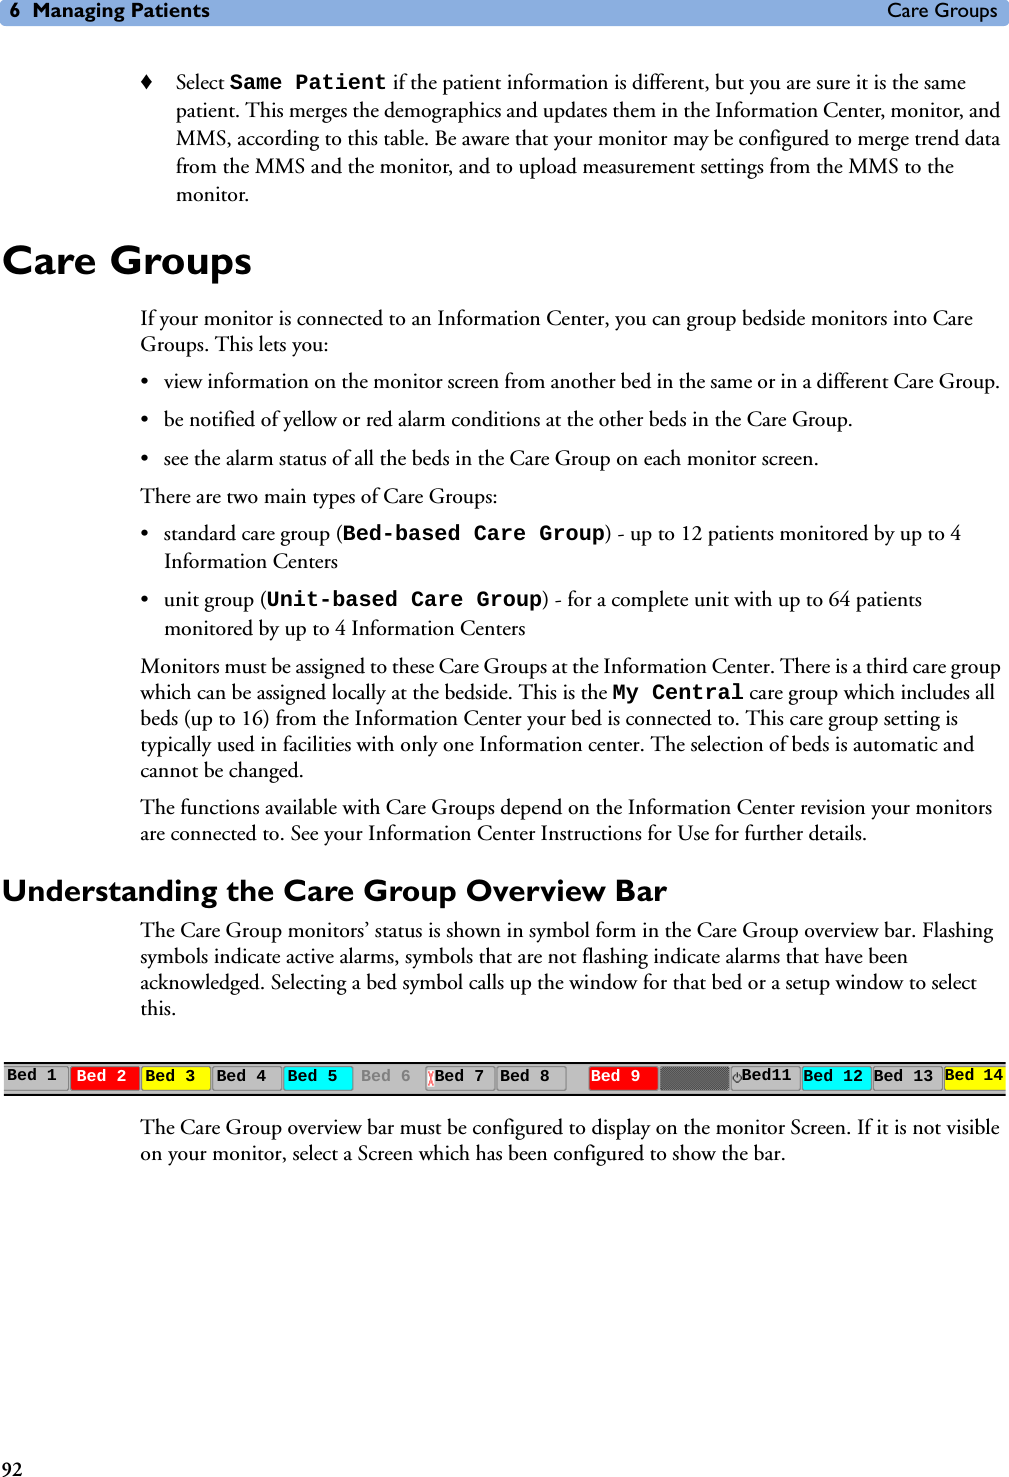 6 Managing Patients Care Groups92♦Select Same Patient if the patient information is different, but you are sure it is the same patient. This merges the demographics and updates them in the Information Center, monitor, and MMS, according to this table. Be aware that your monitor may be configured to merge trend data from the MMS and the monitor, and to upload measurement settings from the MMS to the monitor.Care GroupsIf your monitor is connected to an Information Center, you can group bedside monitors into Care Groups. This lets you:• view information on the monitor screen from another bed in the same or in a different Care Group. • be notified of yellow or red alarm conditions at the other beds in the Care Group. • see the alarm status of all the beds in the Care Group on each monitor screen.There are two main types of Care Groups: • standard care group (Bed-based Care Group) - up to 12 patients monitored by up to 4 Information Centers• unit group (Unit-based Care Group) - for a complete unit with up to 64 patients monitored by up to 4 Information CentersMonitors must be assigned to these Care Groups at the Information Center. There is a third care group which can be assigned locally at the bedside. This is the My Central care group which includes all beds (up to 16) from the Information Center your bed is connected to. This care group setting is typically used in facilities with only one Information center. The selection of beds is automatic and cannot be changed.The functions available with Care Groups depend on the Information Center revision your monitors are connected to. See your Information Center Instructions for Use for further details.Understanding the Care Group Overview Bar The Care Group monitors’ status is shown in symbol form in the Care Group overview bar. Flashing symbols indicate active alarms, symbols that are not flashing indicate alarms that have been acknowledged. Selecting a bed symbol calls up the window for that bed or a setup window to select this.The Care Group overview bar must be configured to display on the monitor Screen. If it is not visible on your monitor, select a Screen which has been configured to show the bar. Bed 1 Bed 2 Bed 3 Bed 4 Bed 5 Bed 6 Bed 7 Bed 8 Bed 9 Bed11 Bed 12 Bed 13 Bed 14